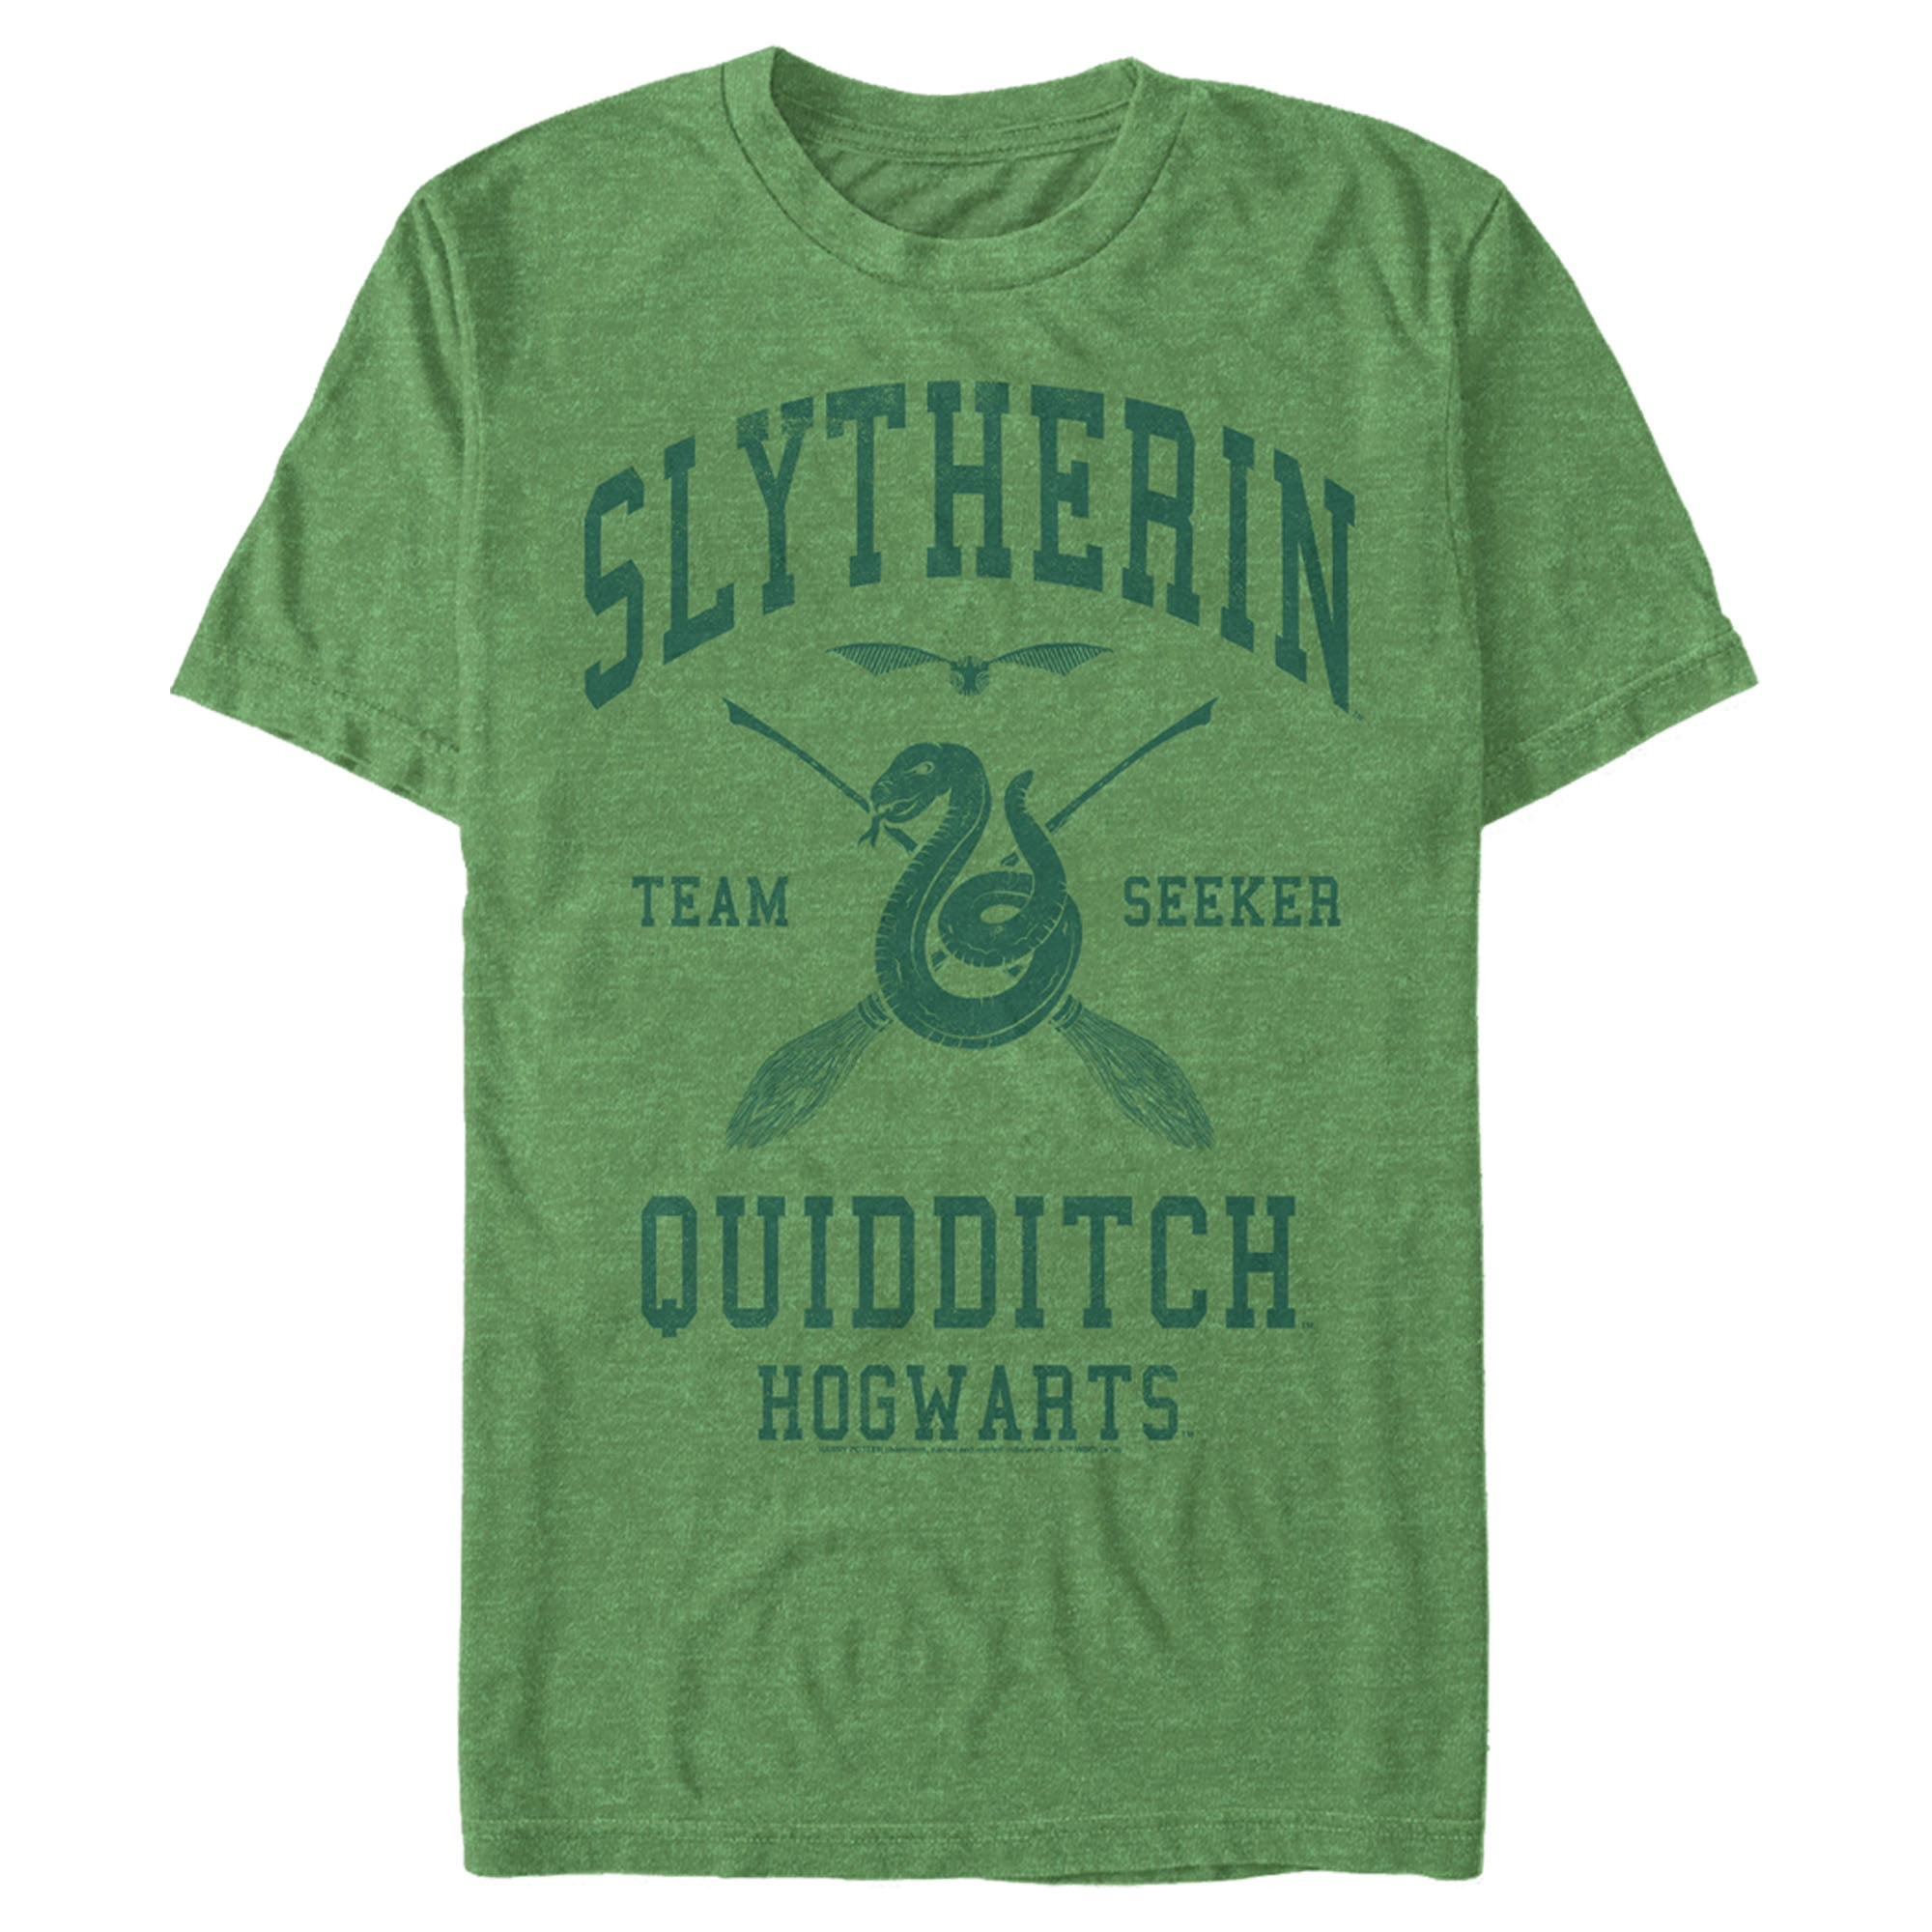 Men's Harry Potter Slytherin Quidditch Team Graphic Tee Black Large -